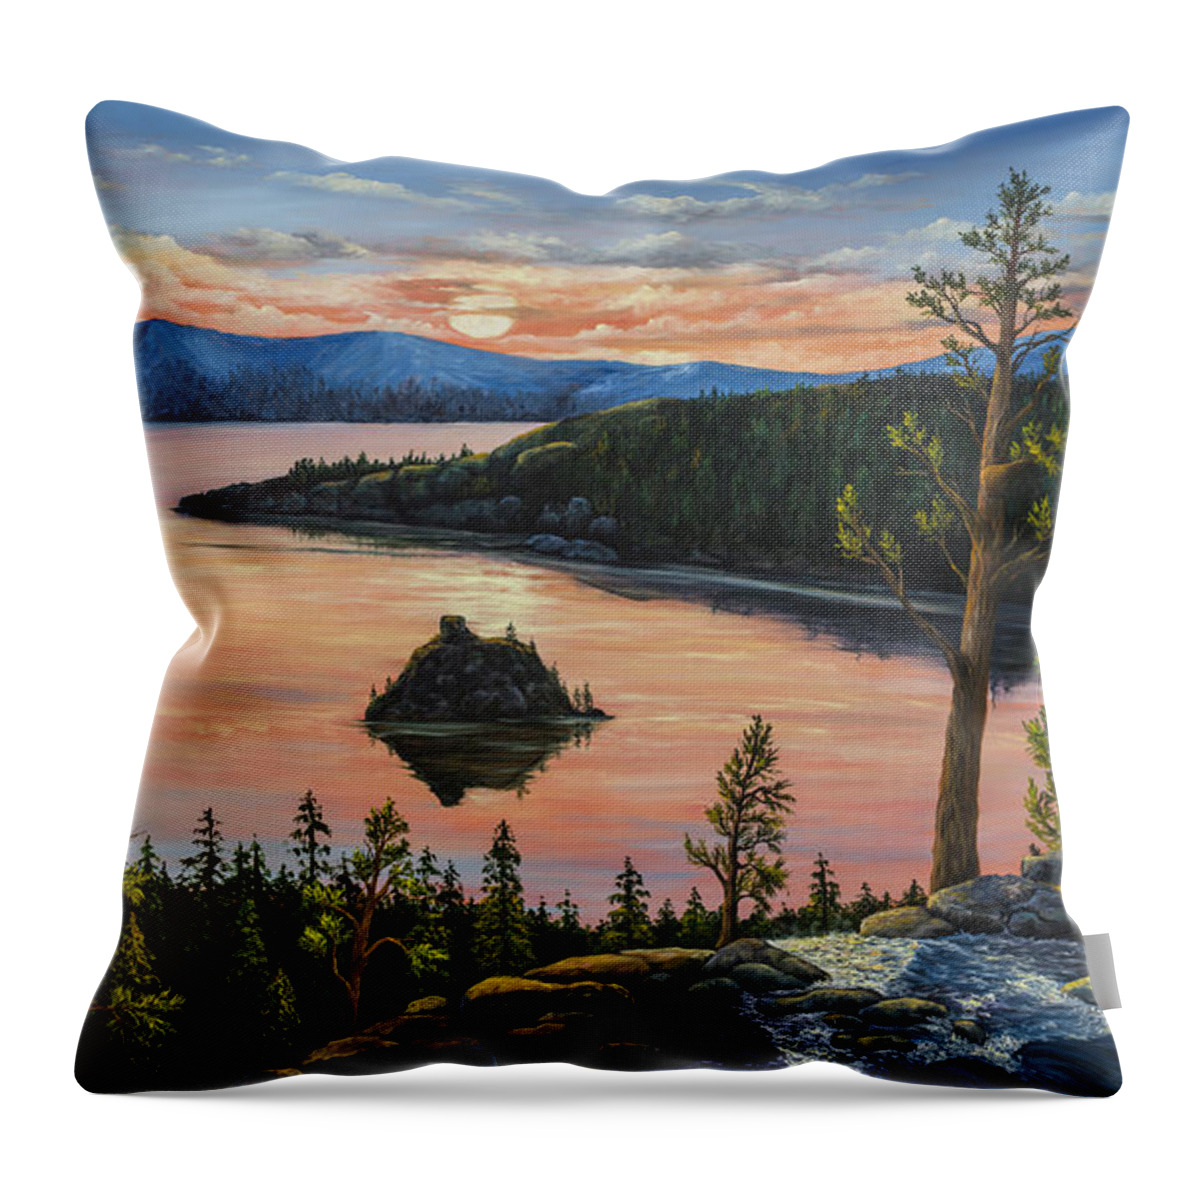 Landscape Throw Pillow featuring the painting Emerald Bay by Darice Machel McGuire